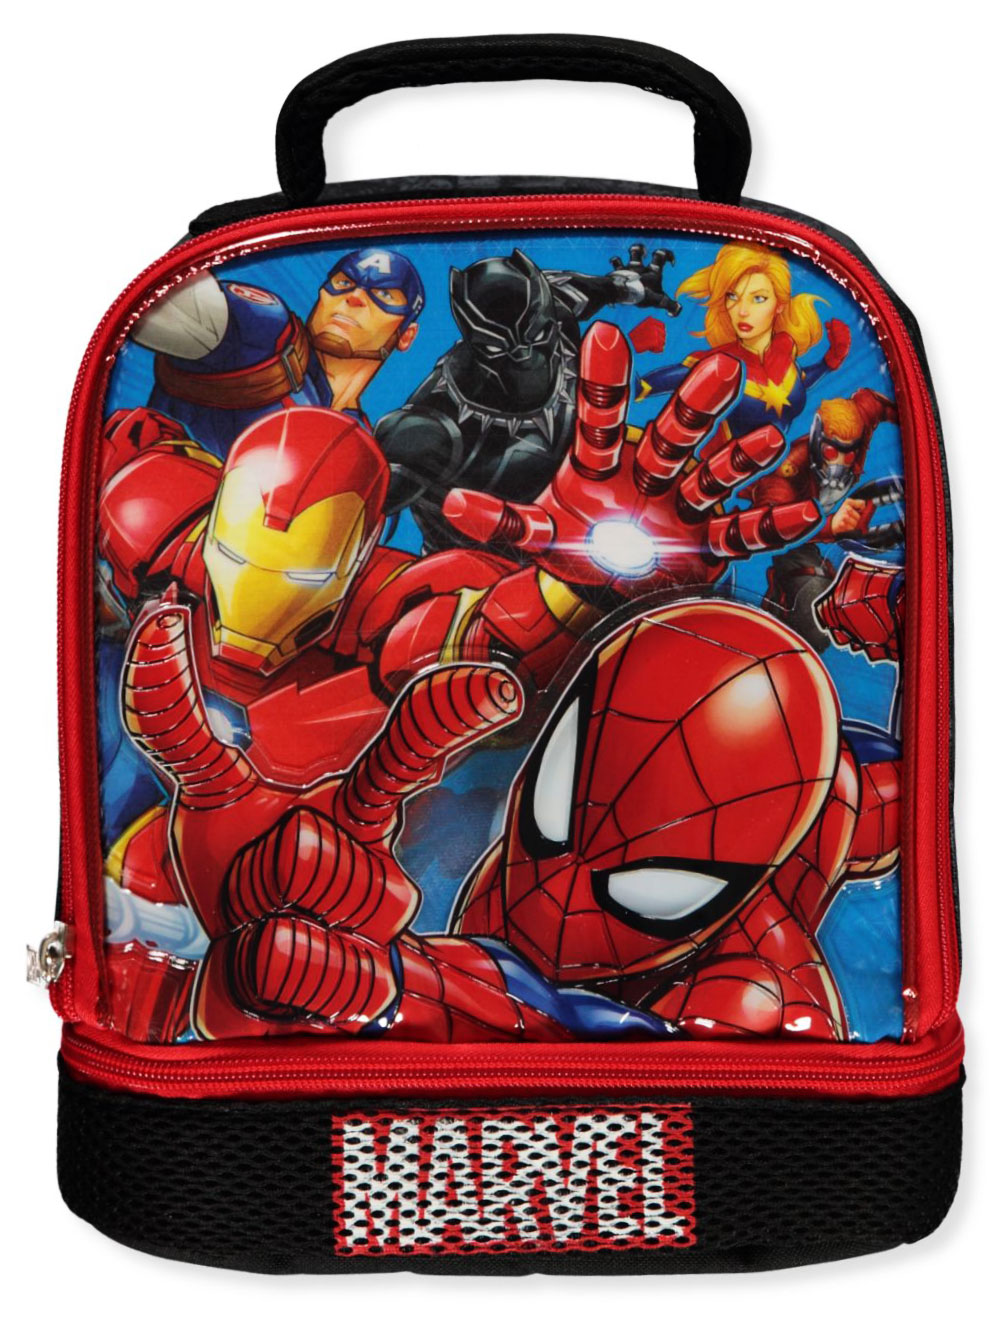 Boys Lunch Boxes